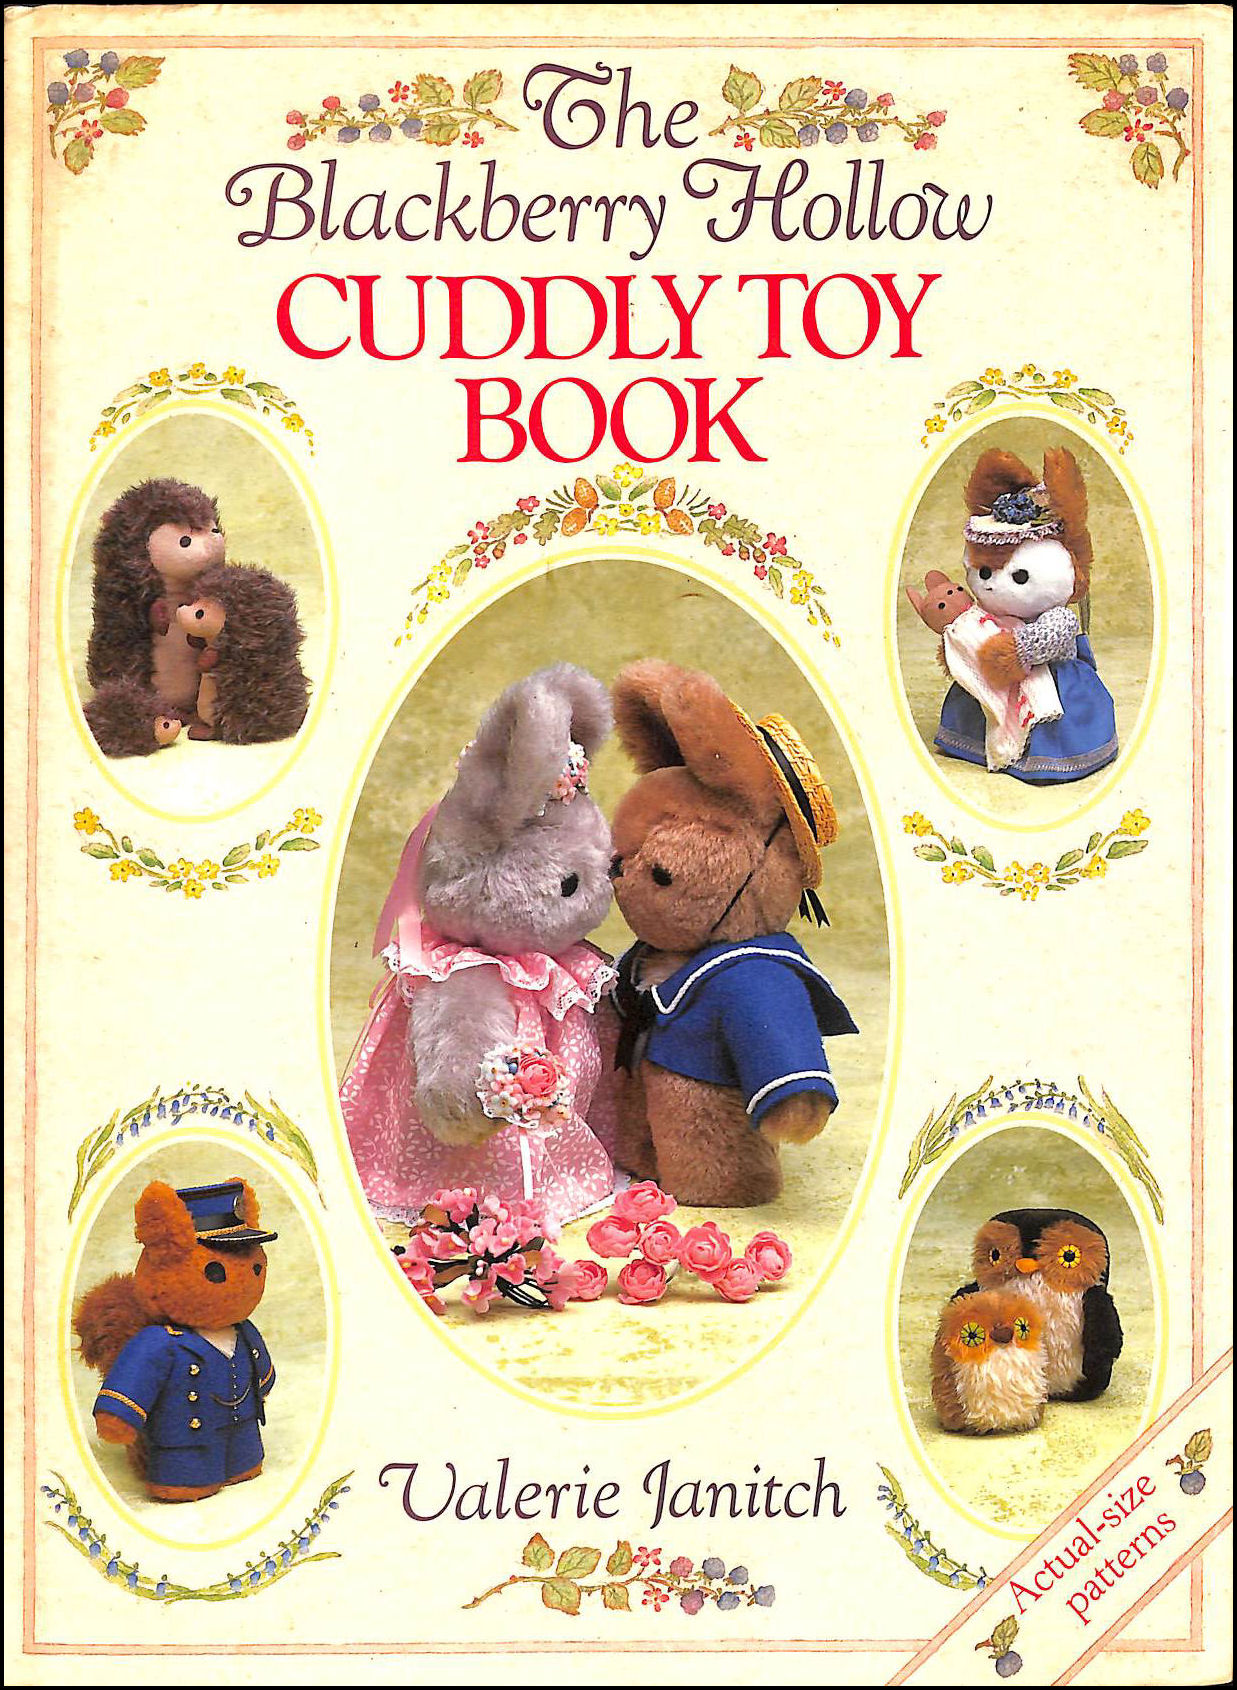 JANITCH, VALERIE - The Blackberry Hollow Cuddly Toy Book (A David and Charles craft book)